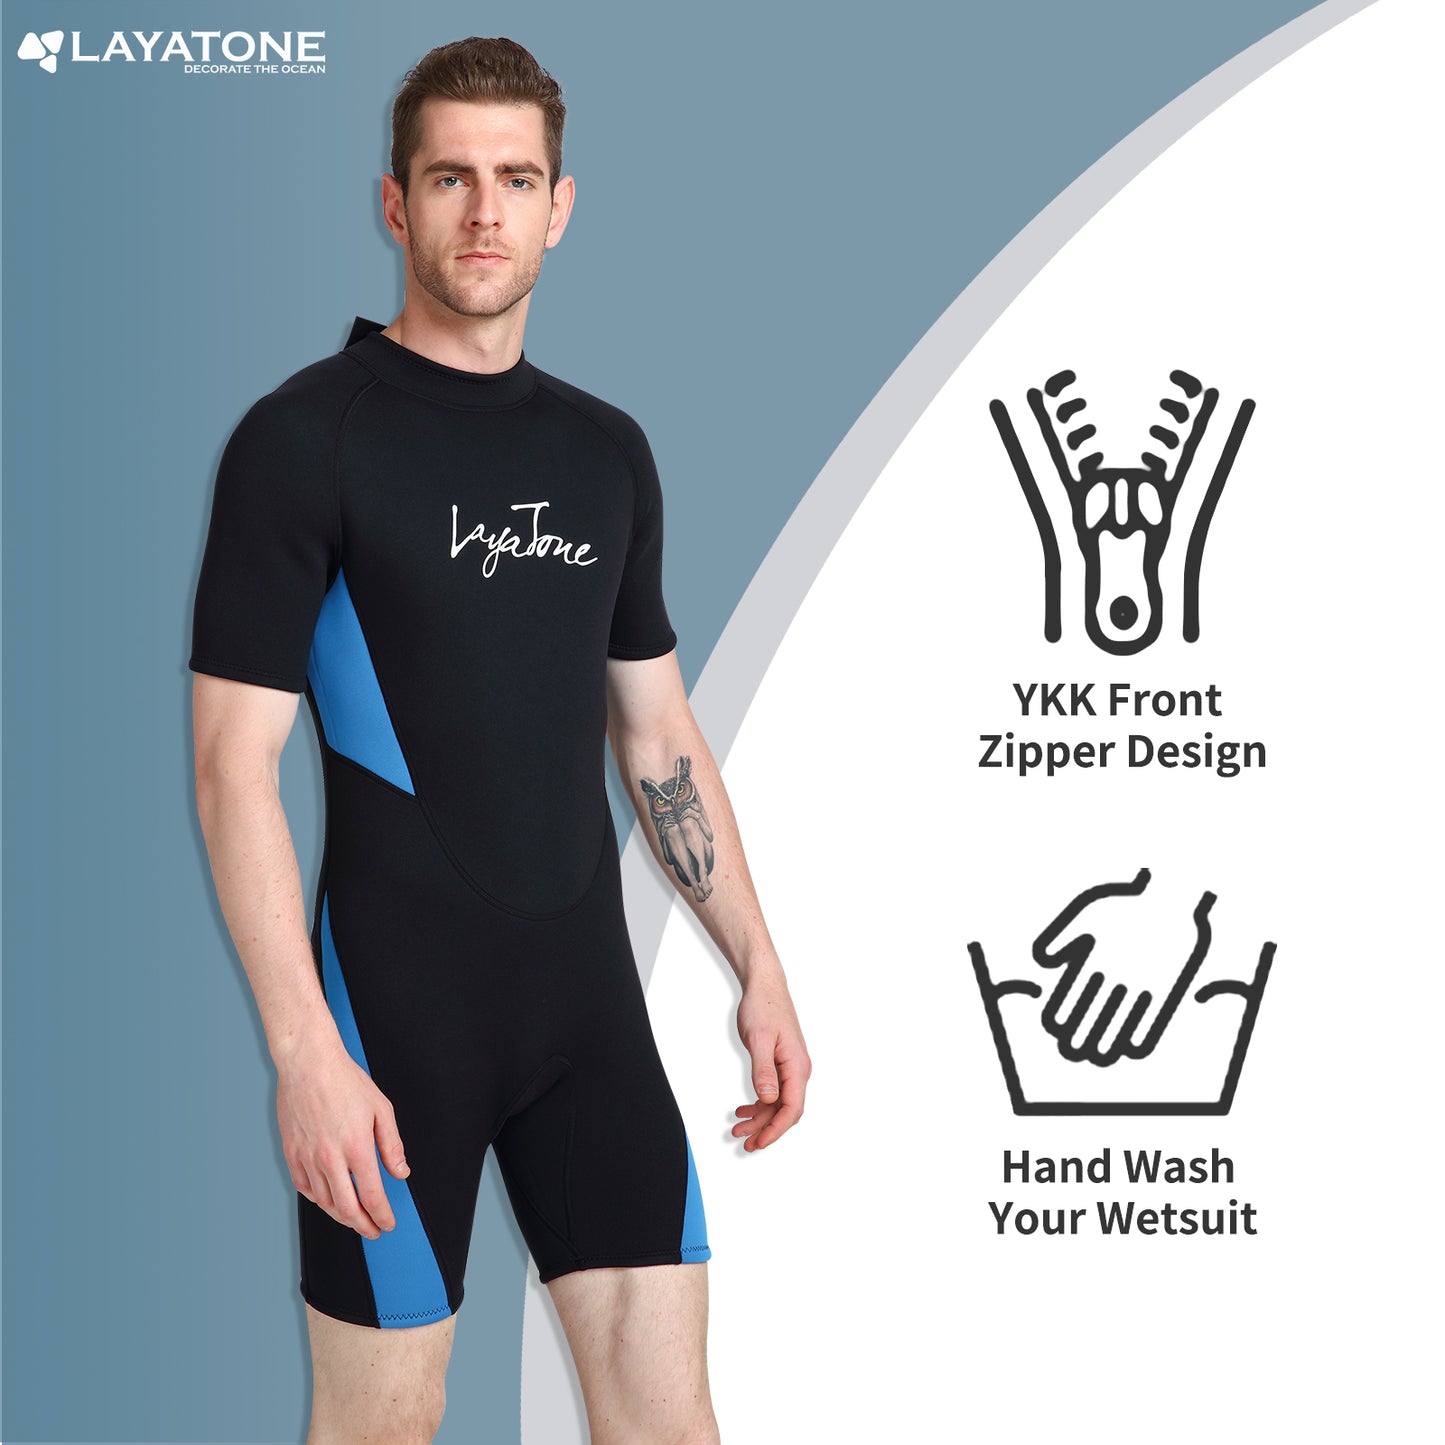 LayaTone Shorty Wetsuit Mens Womens 3mm Neoprene Shorty Wetsuits for Swimming Diving Surfing Freediving Snorkeling